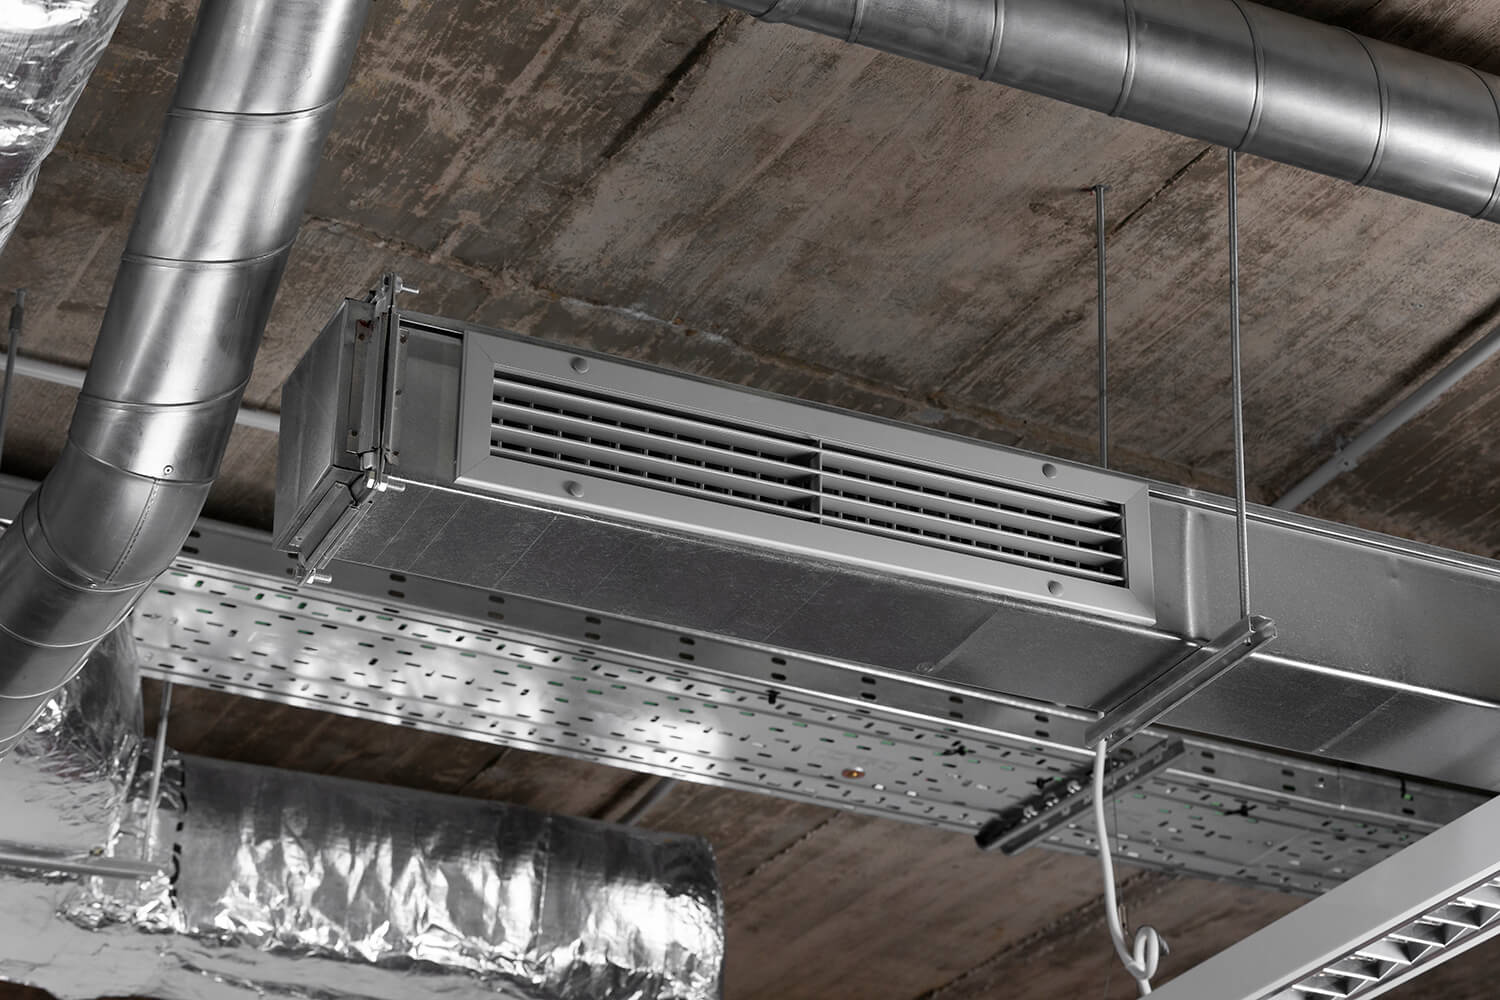 Finding the right air conditioning service in Jacksonville FL is difficult